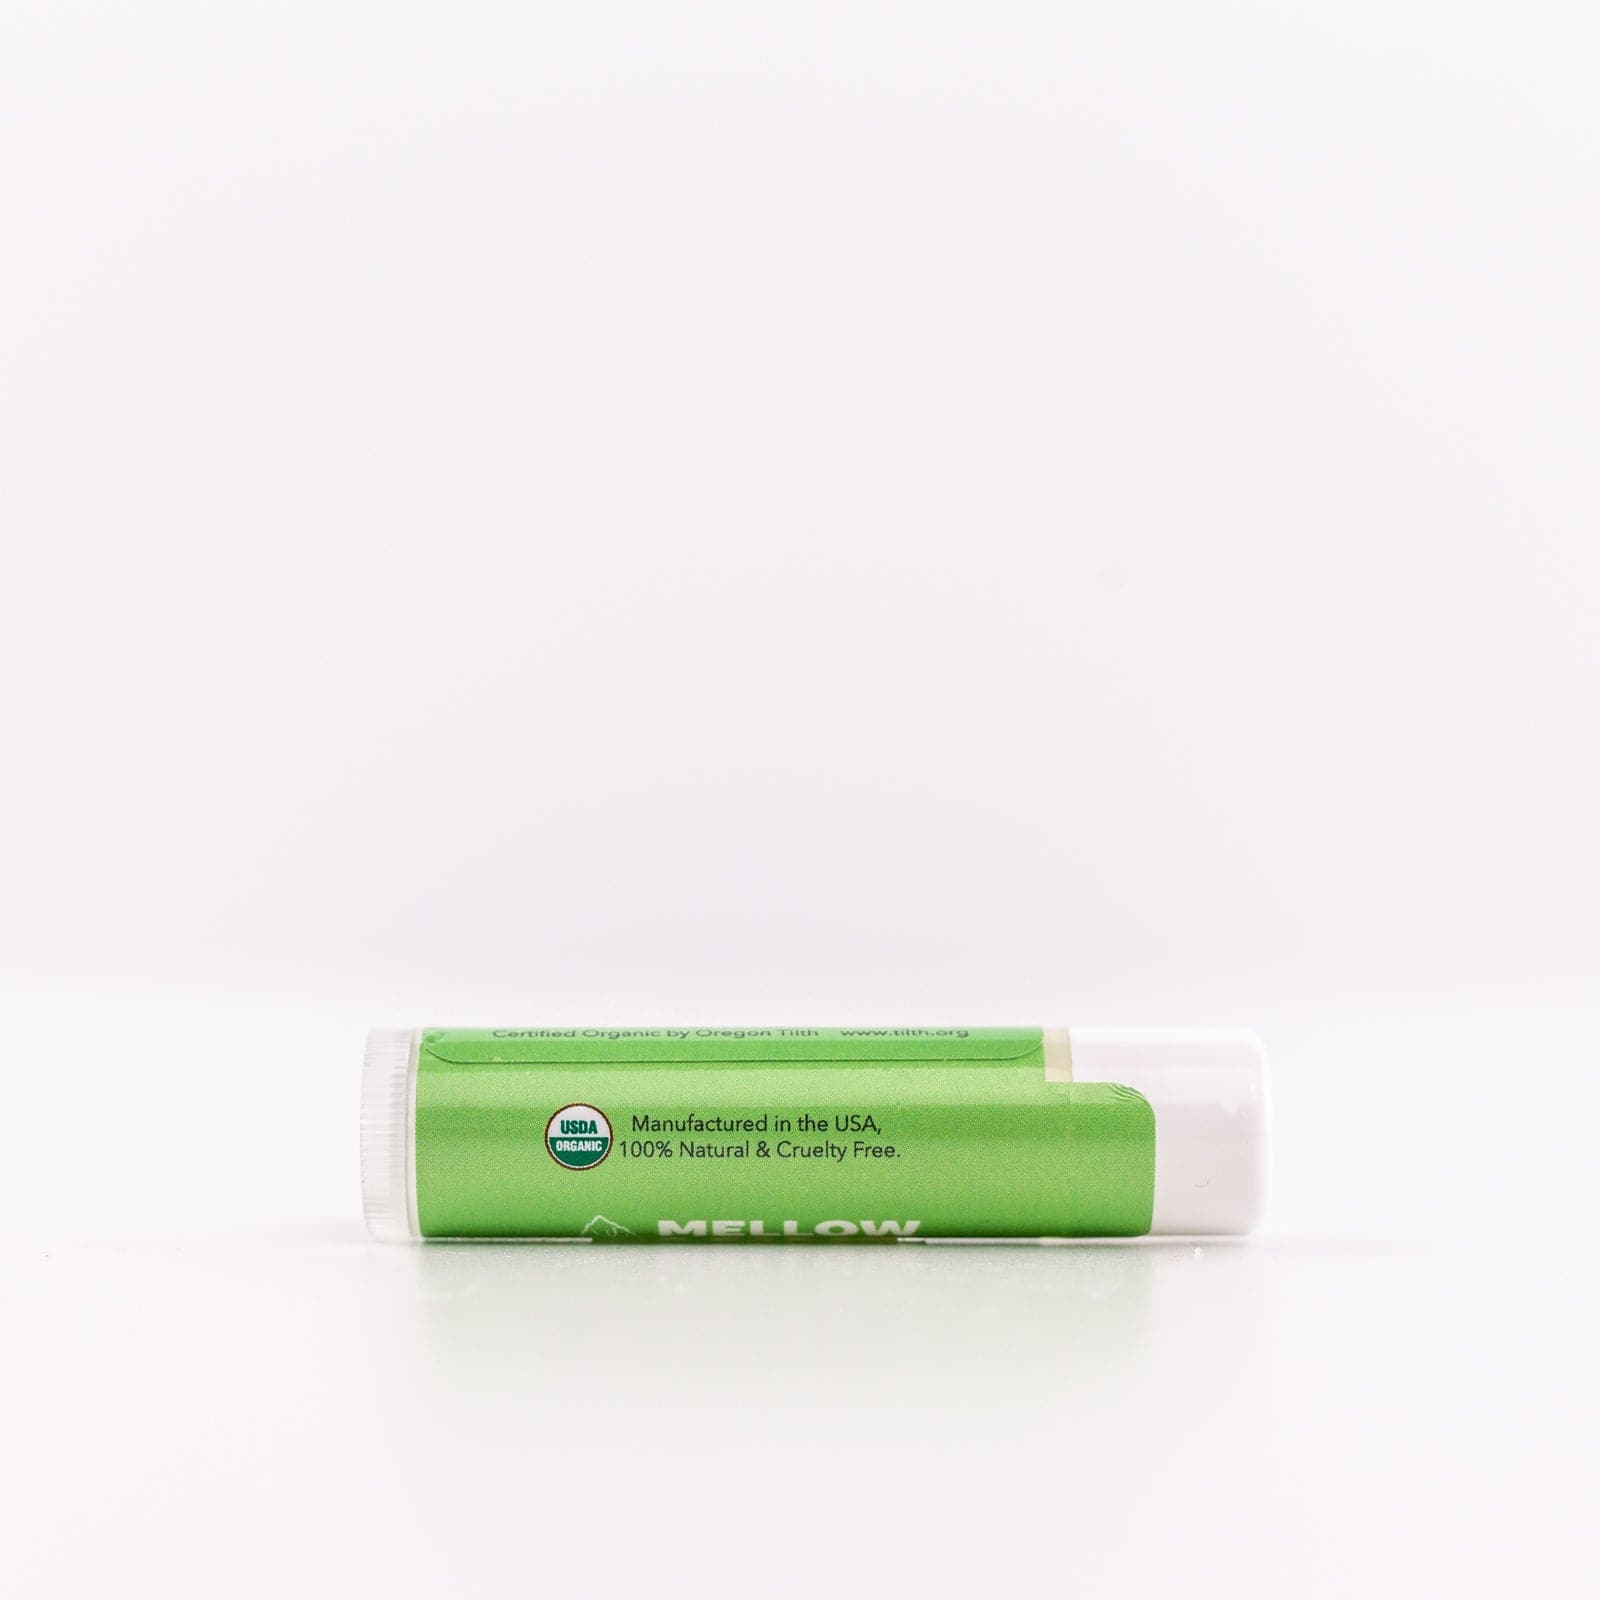 Green Mellow Mint Lip Balm container against white background 